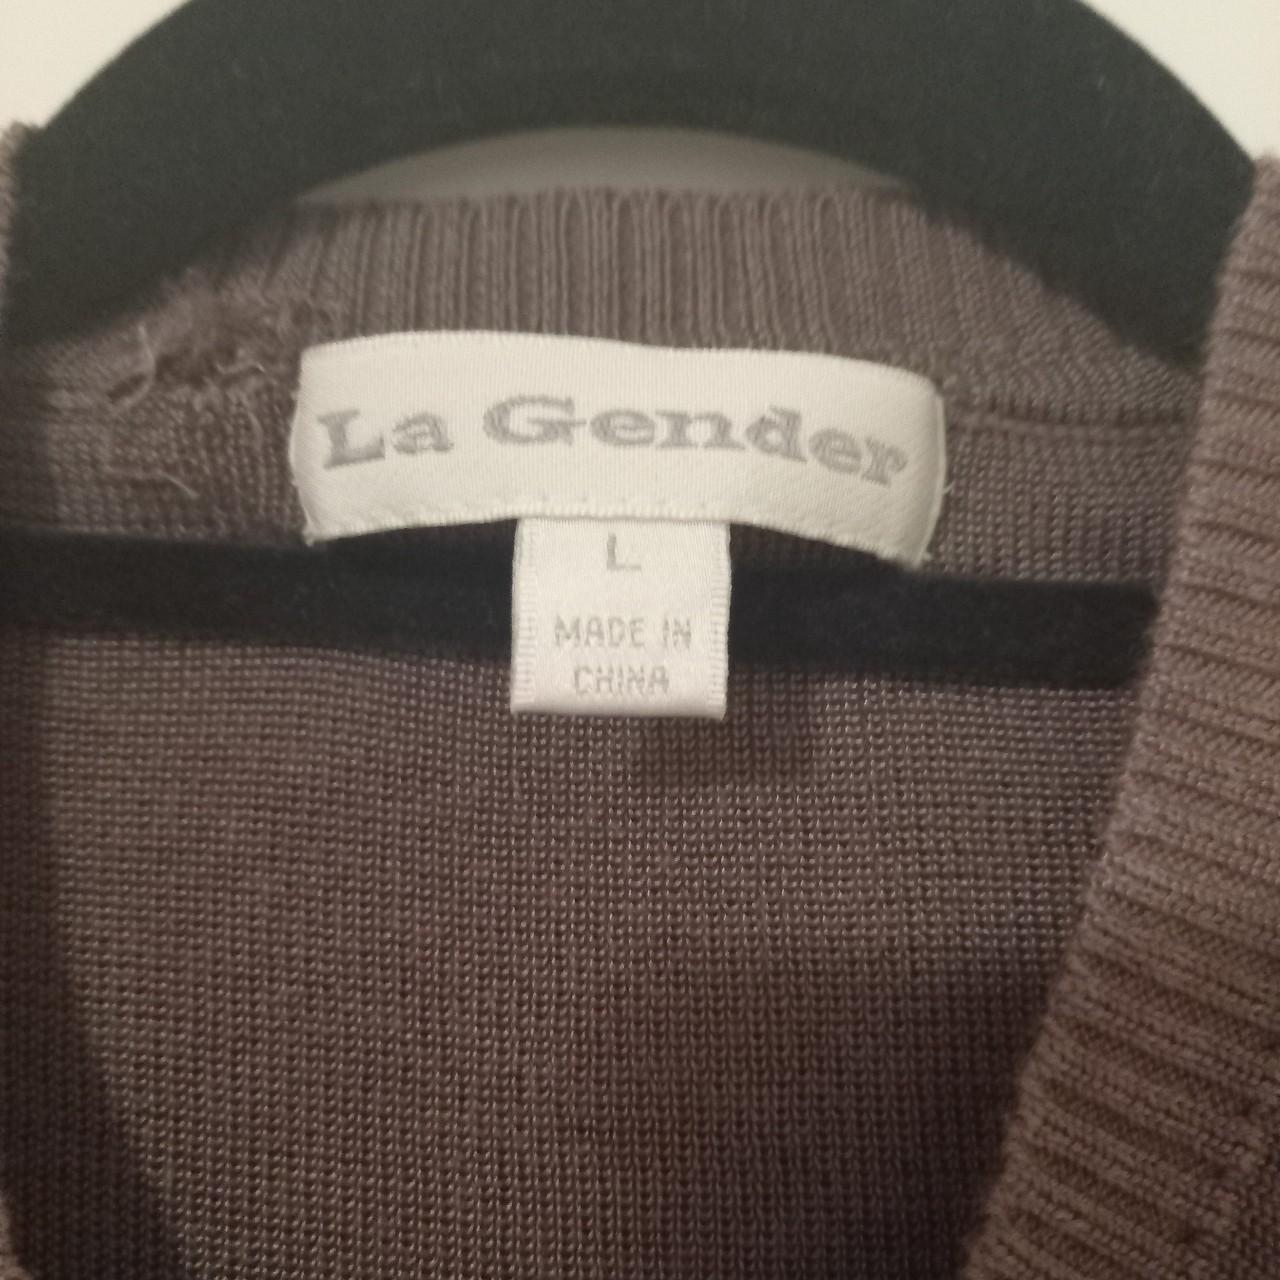 La Gender brown and white top Size L - imo would... - Depop